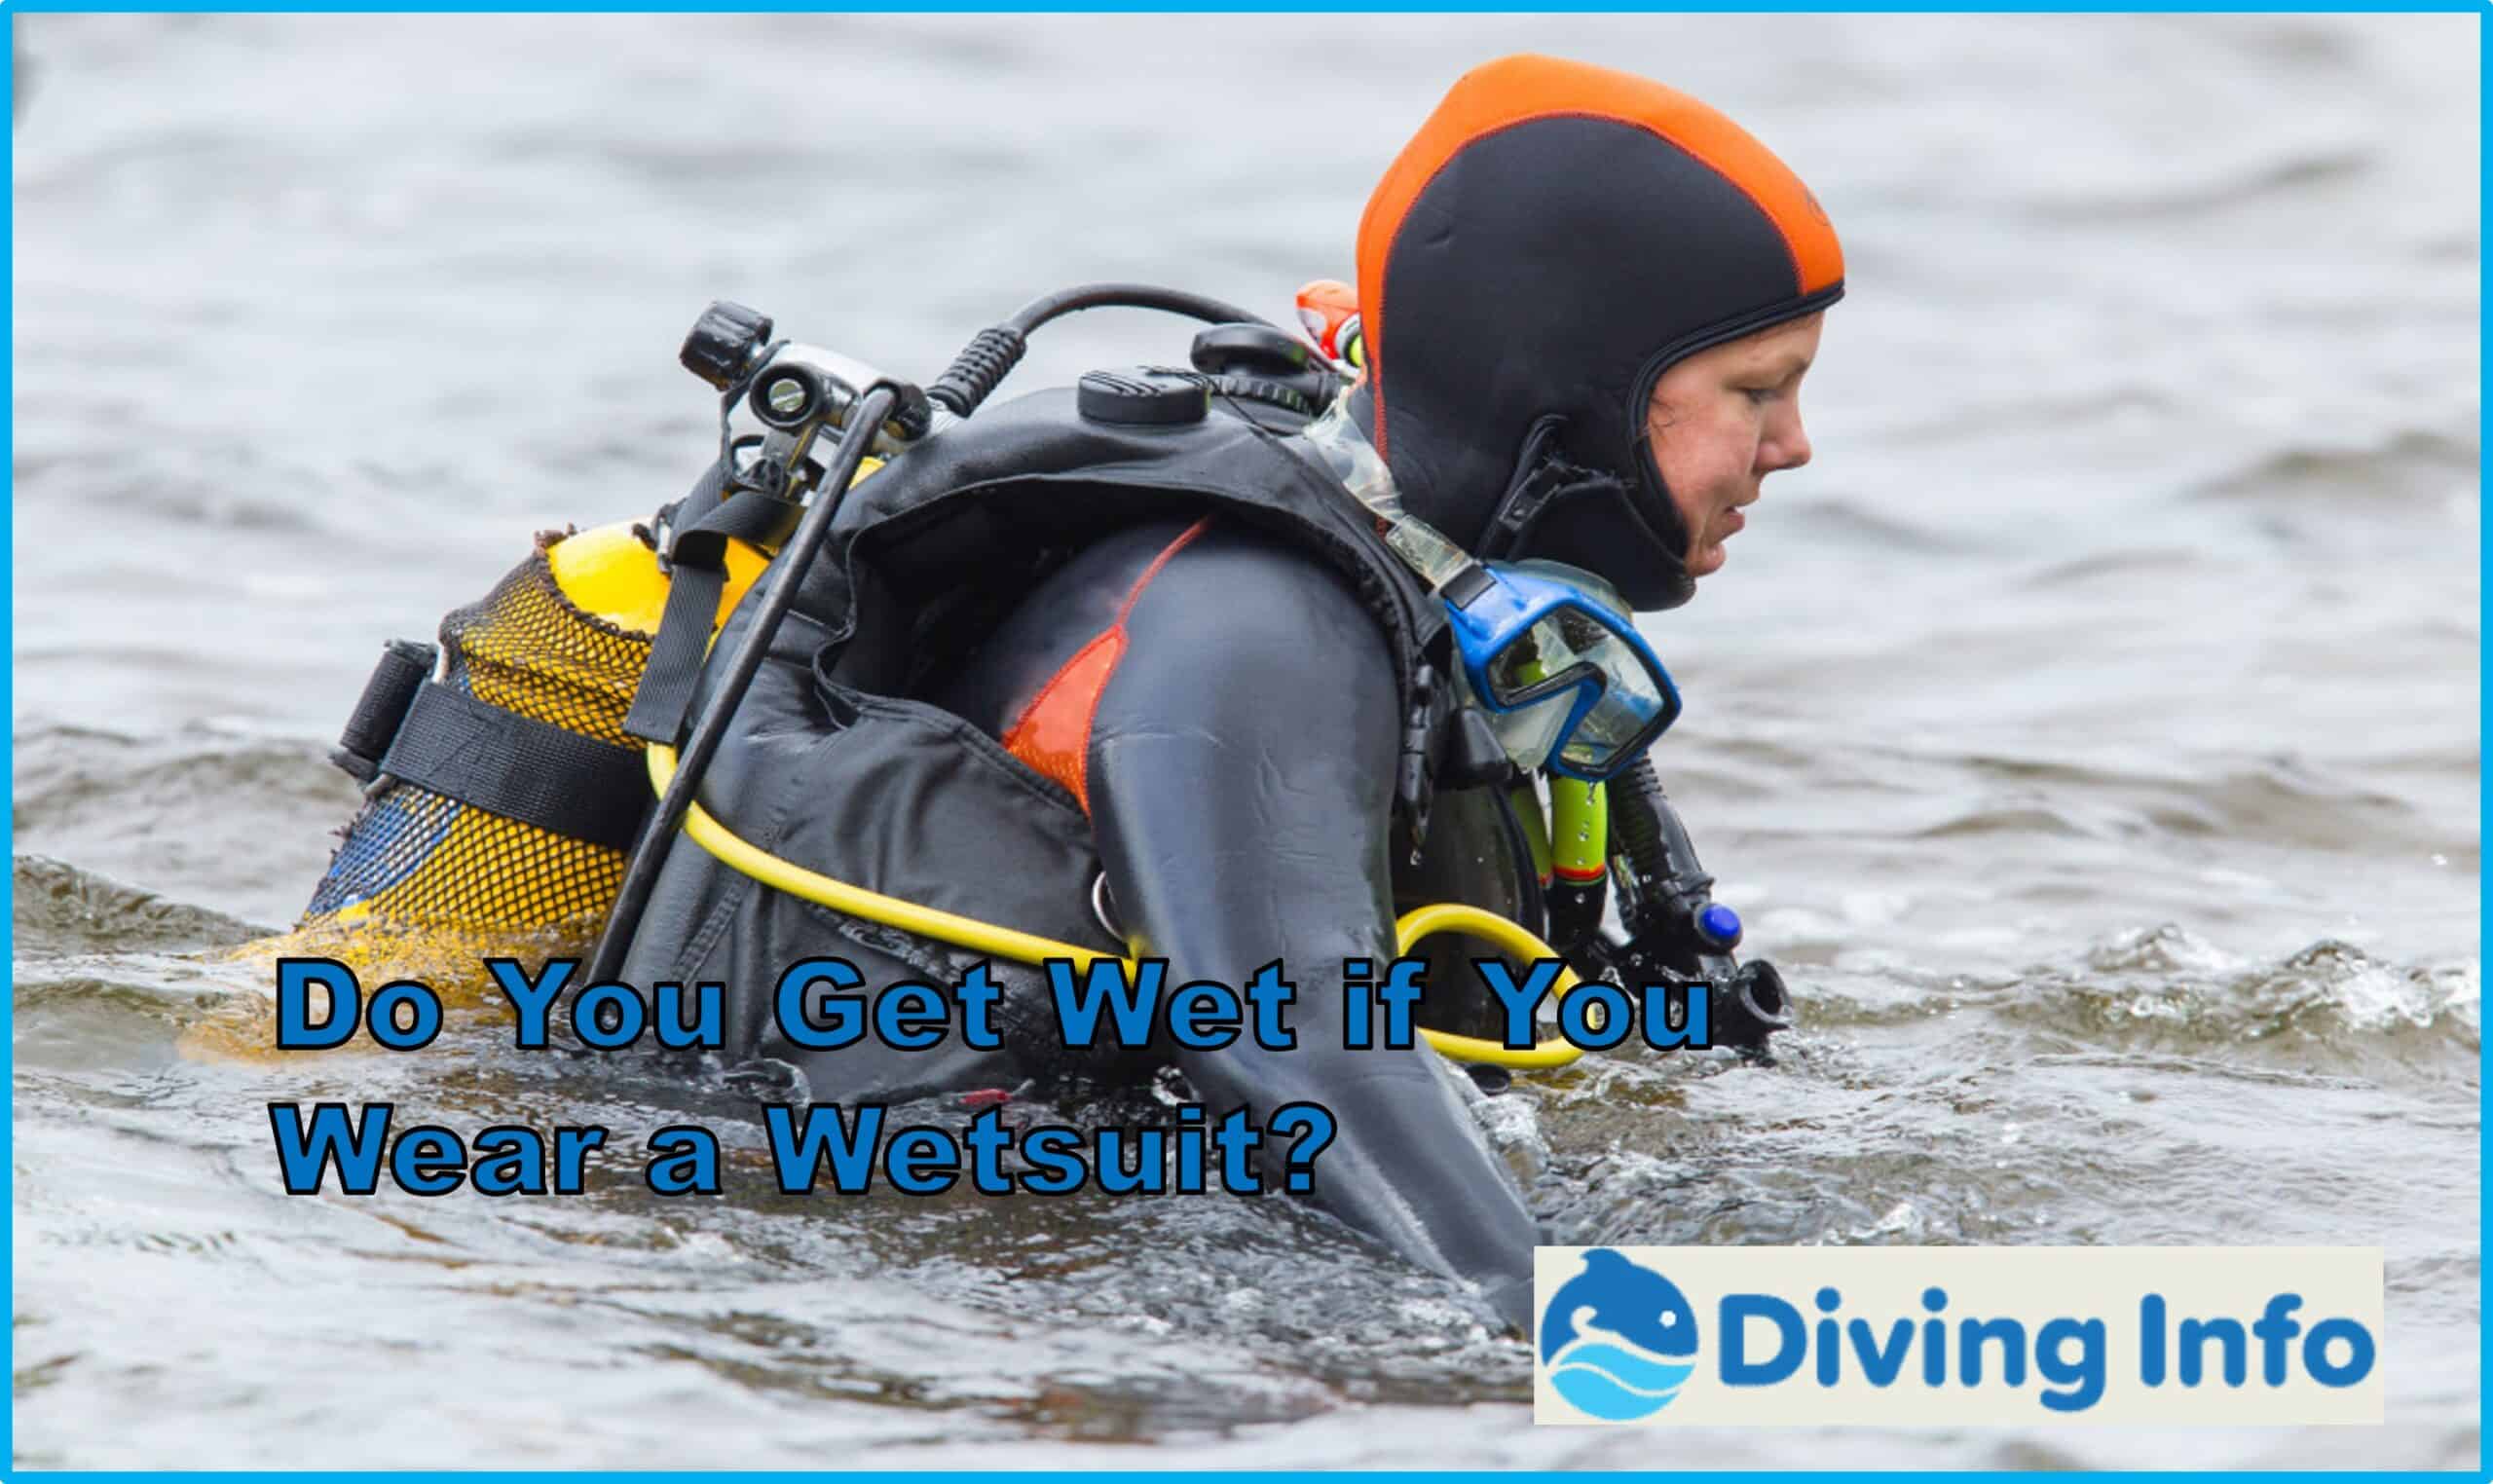 Do You Get Wet if You Wear a Wetsuit?